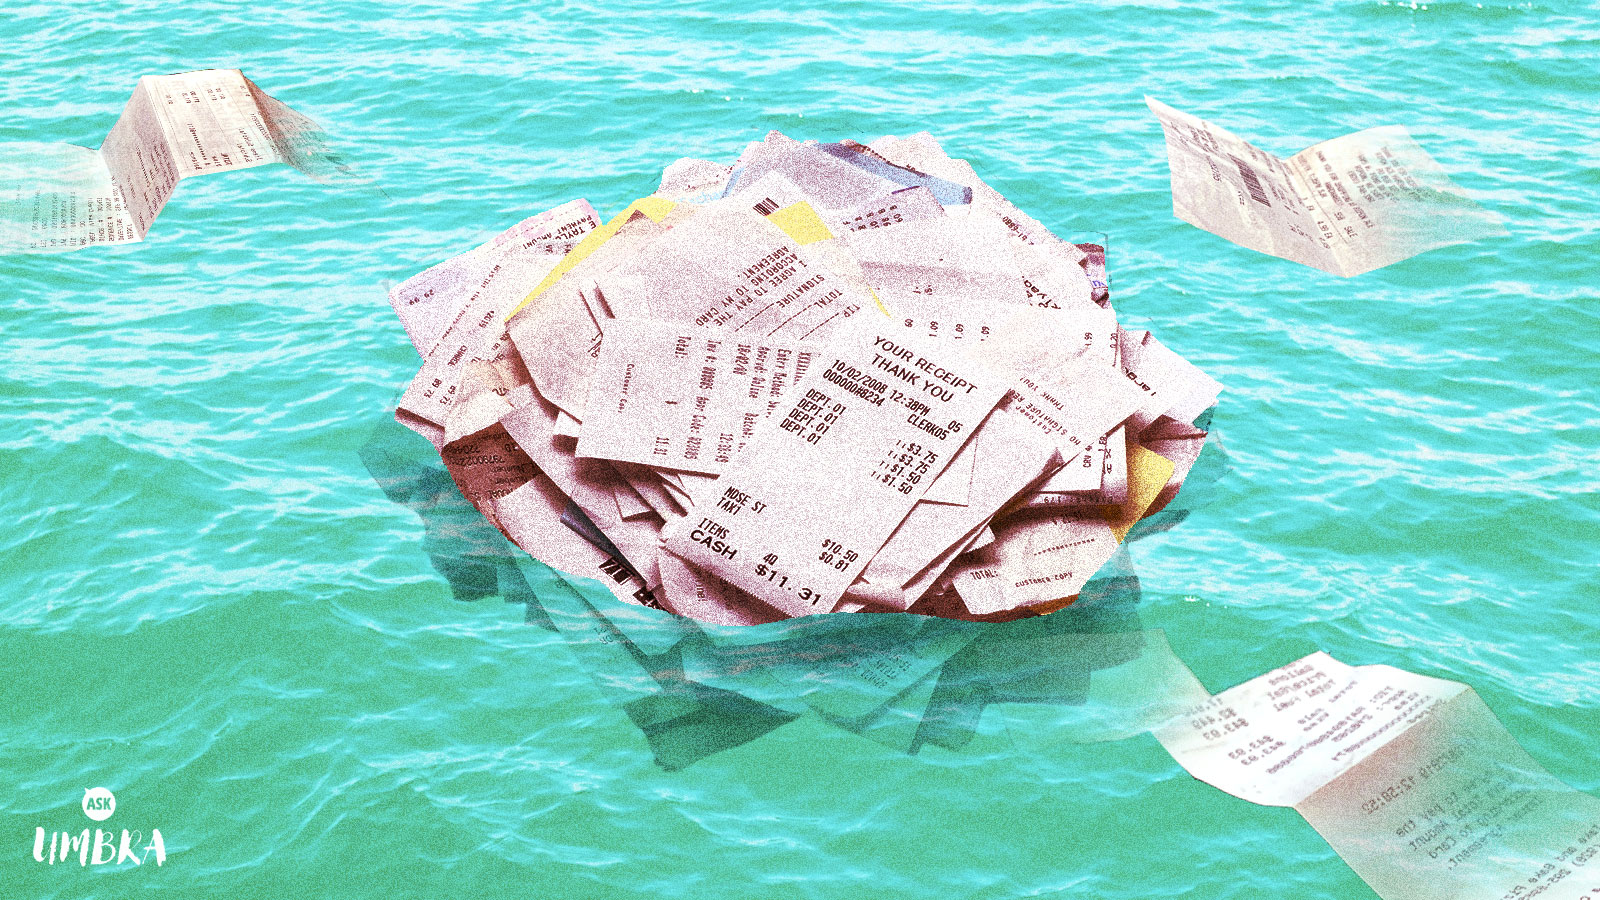 A pile of receipts floating in the ocean